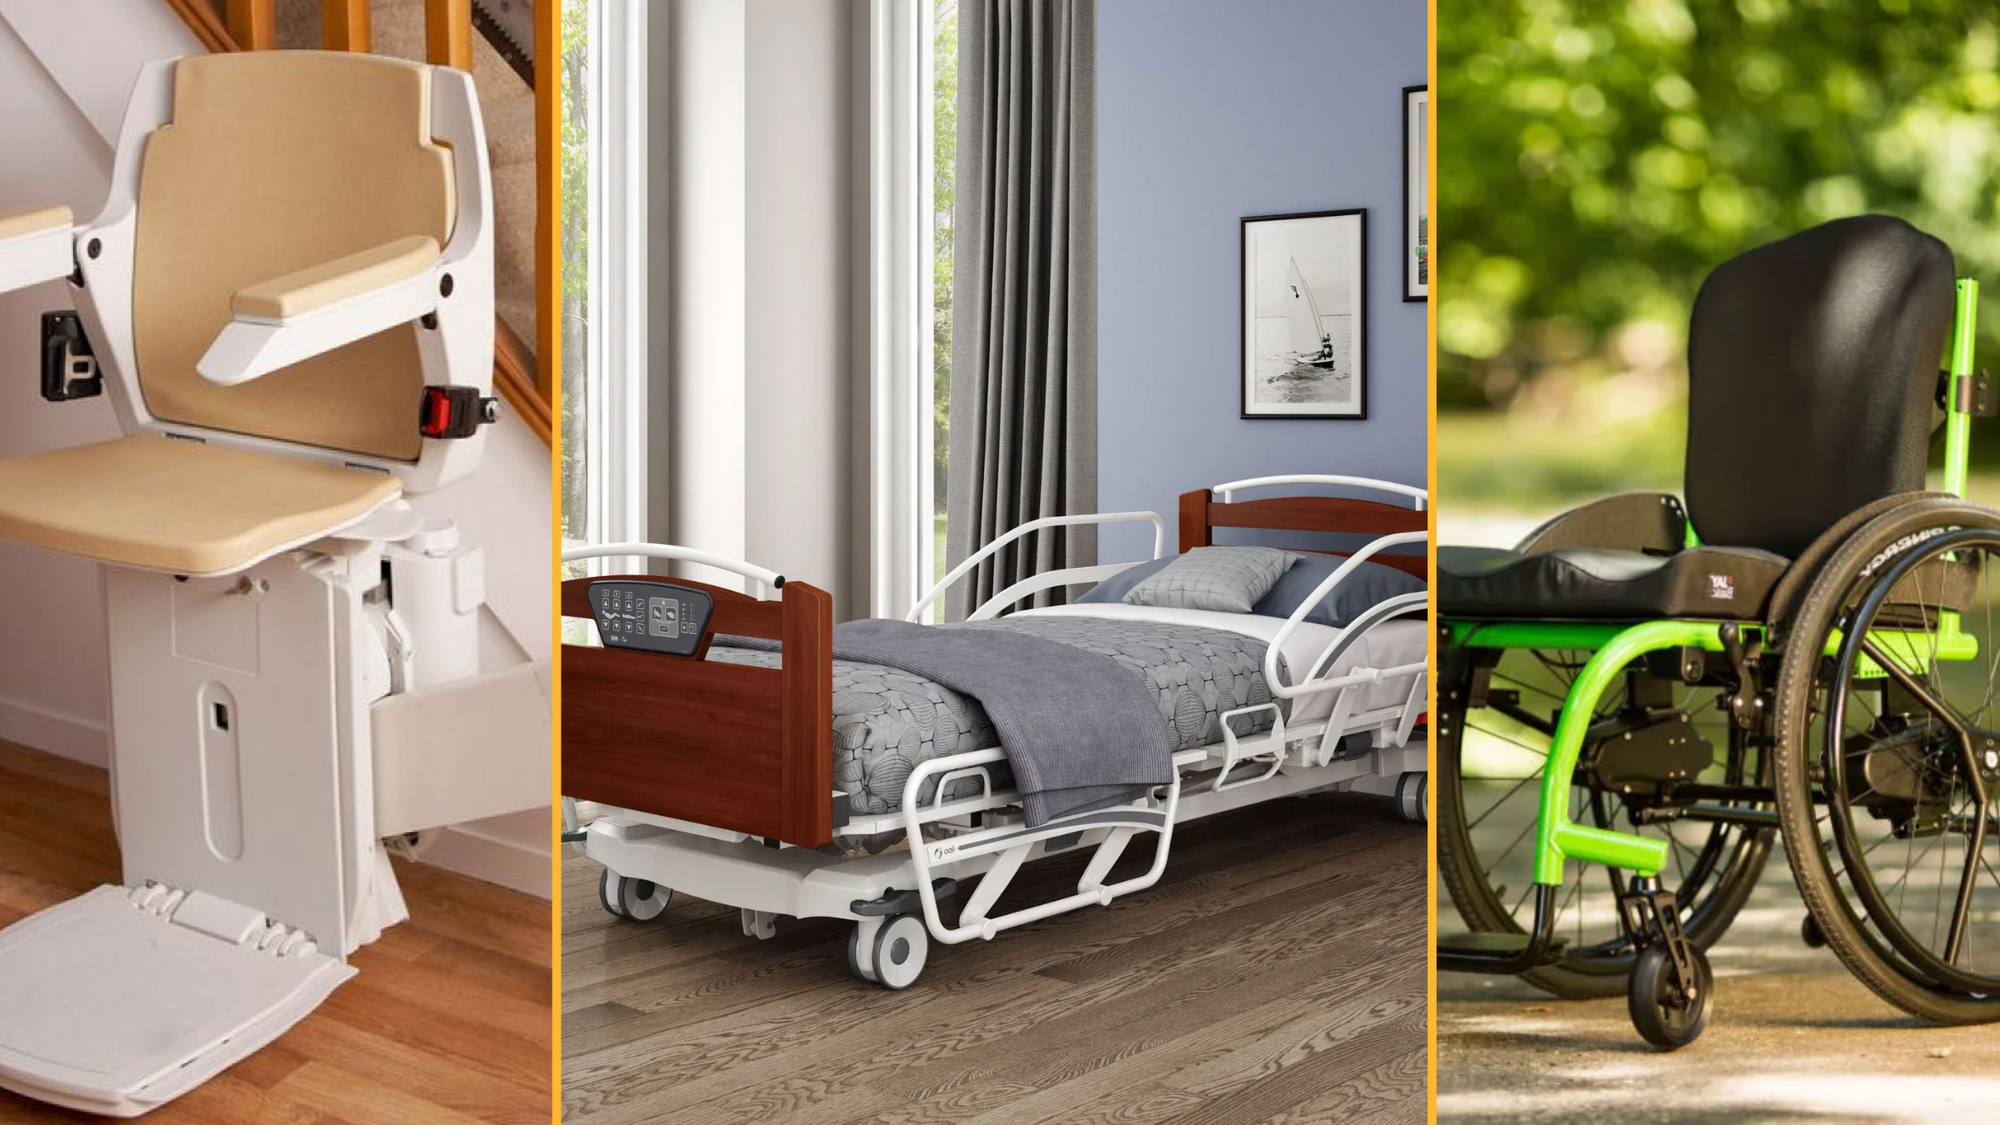 Wheelchairs, stair lifts, assistive beds, lift chairs, lifts and walkers